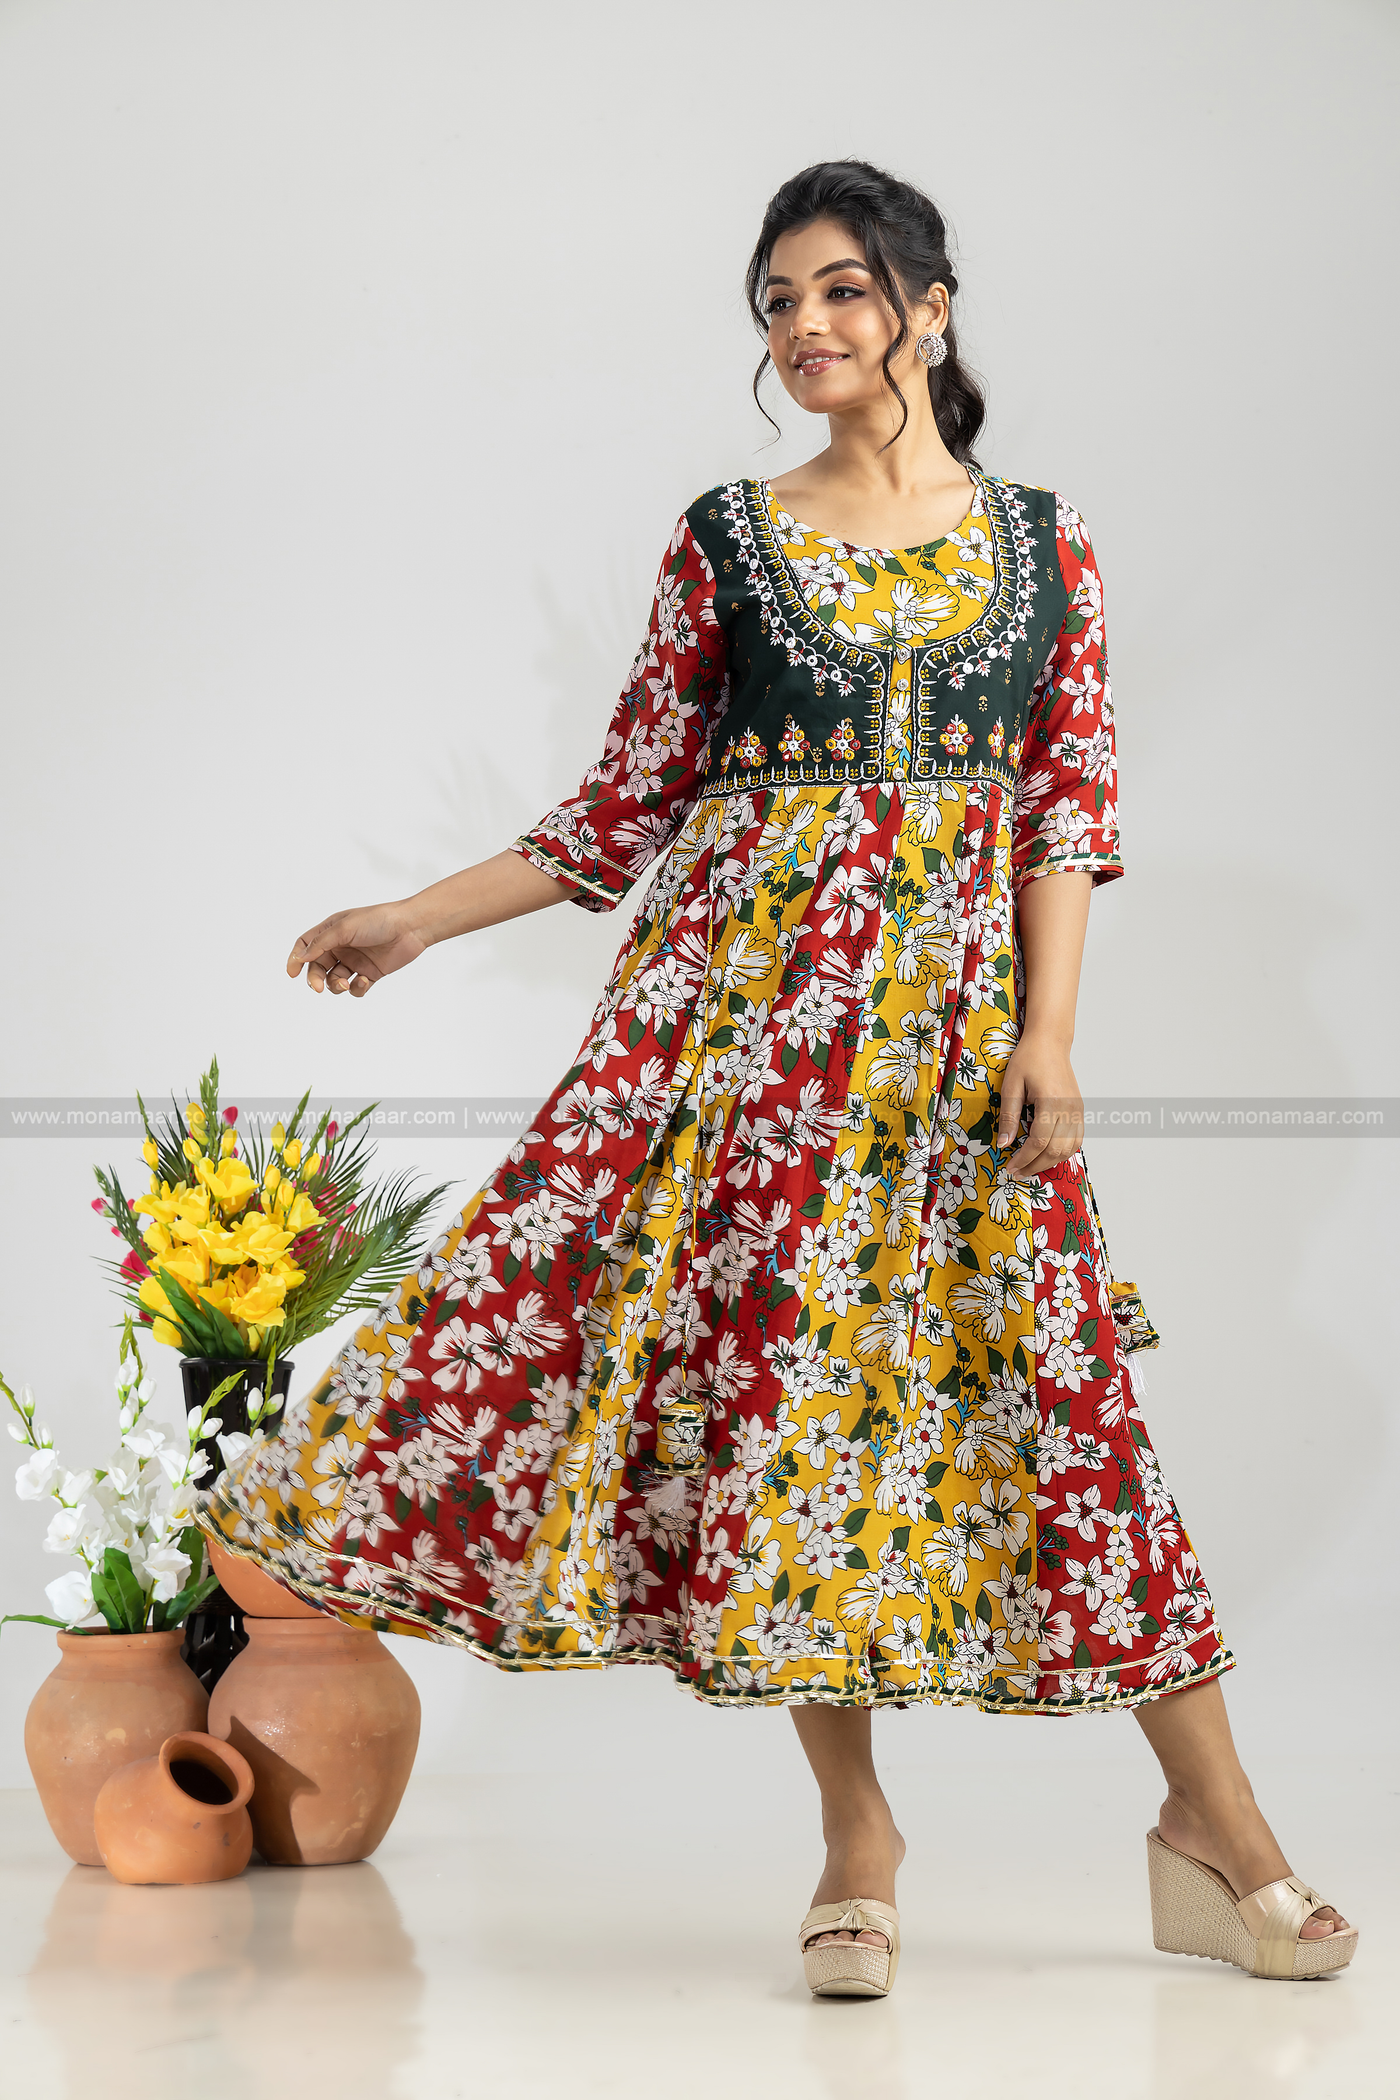 30 Latest Models of Long Frocks With Images in 2023